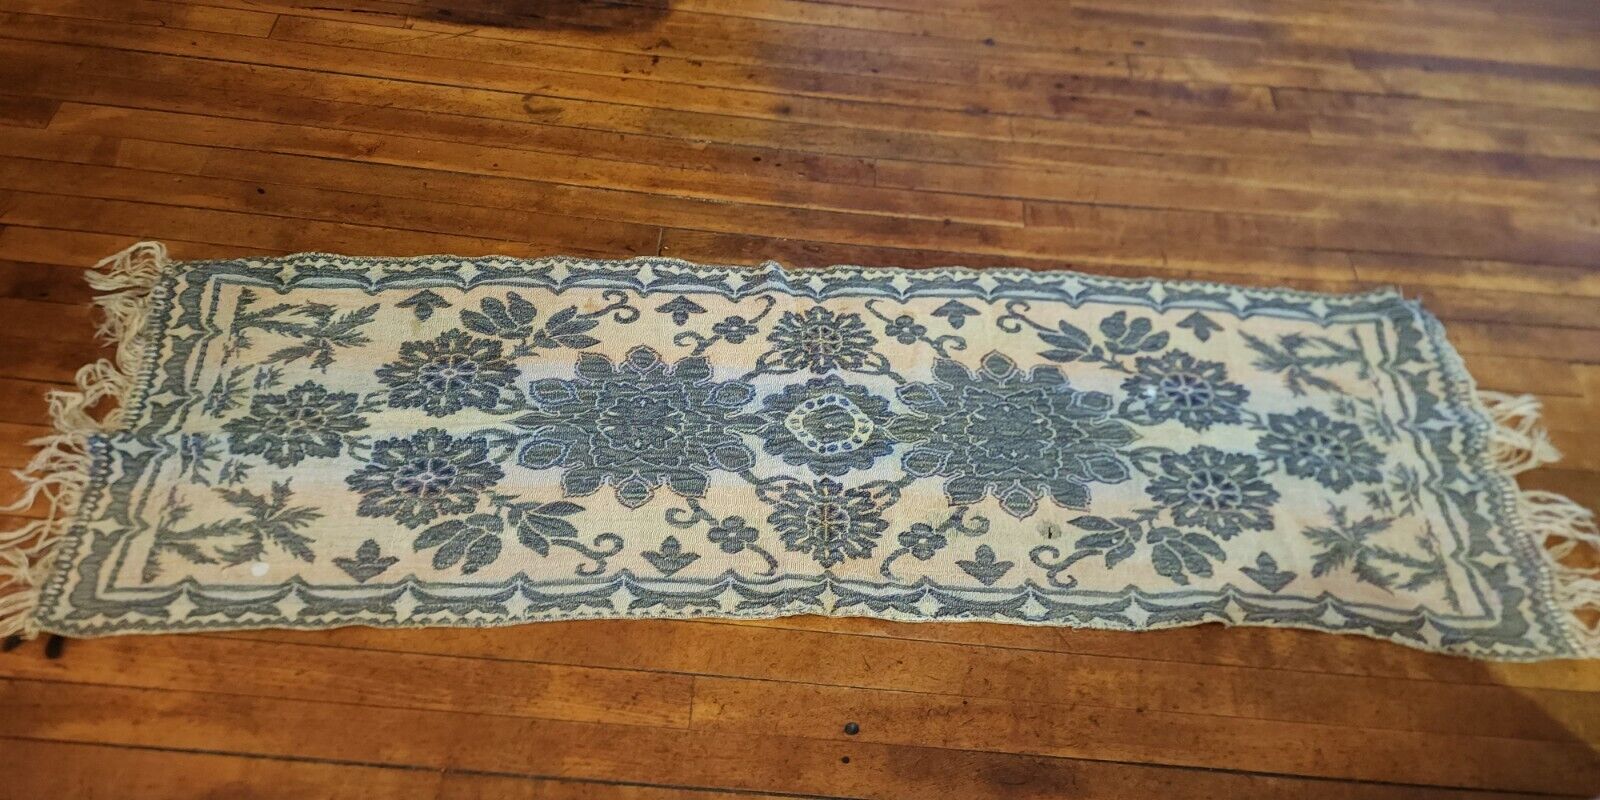 Antique Tapestry Mantle Scarf Table Runner Floral 16x48 Inch Plus Fringe FLAWS